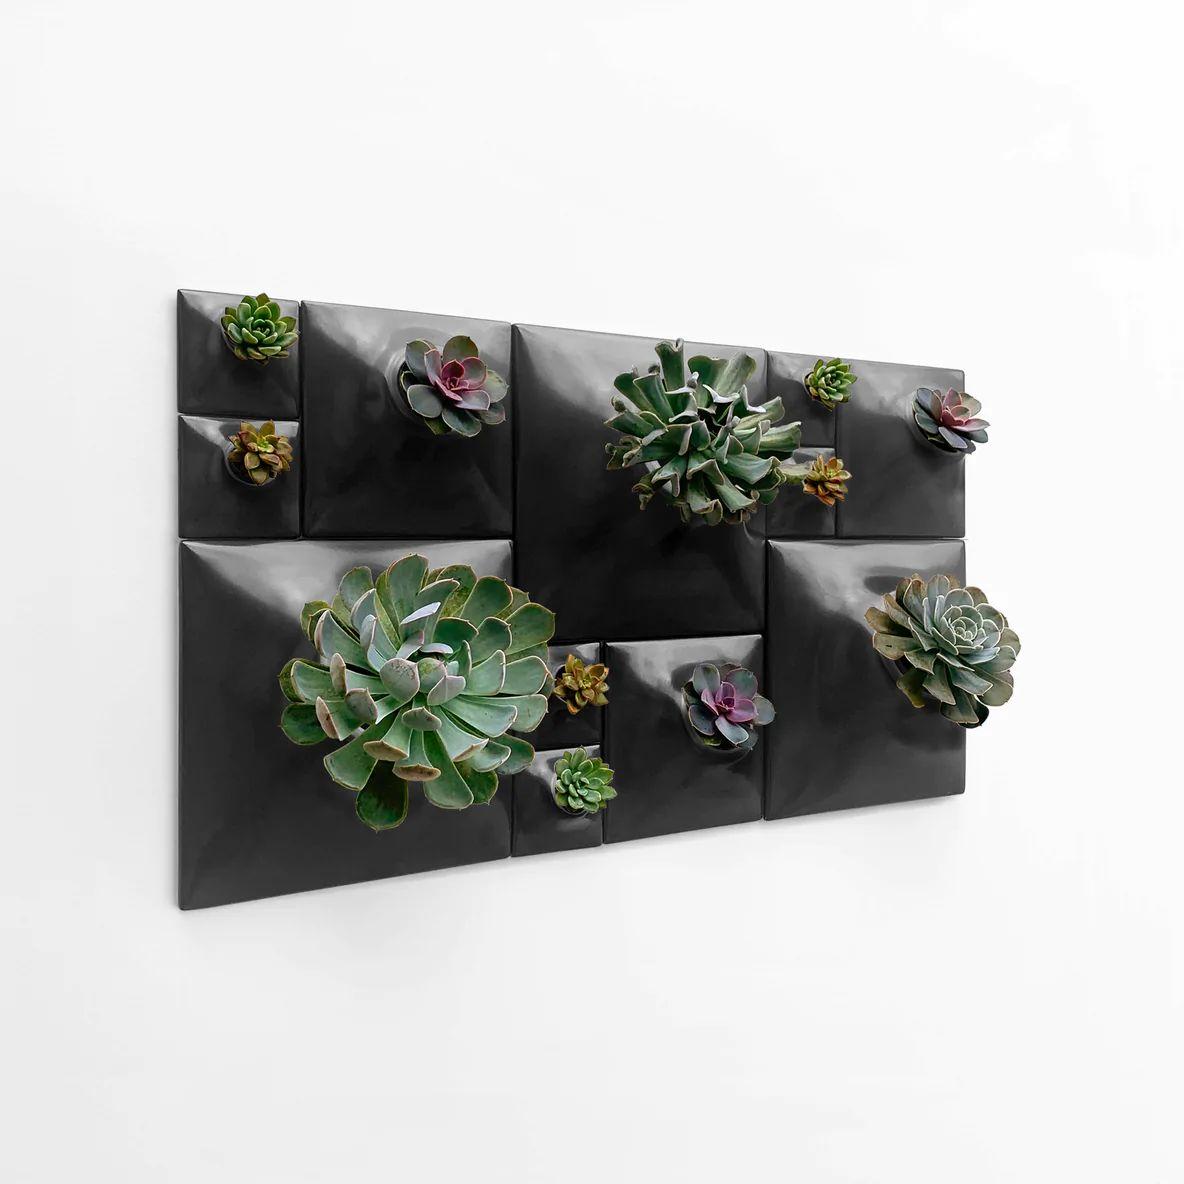 Modern Black Greenwall, Mid Century Modern Wall Decor, Moss Wall Art, Node BS3 In New Condition For Sale In Bridgeport, PA